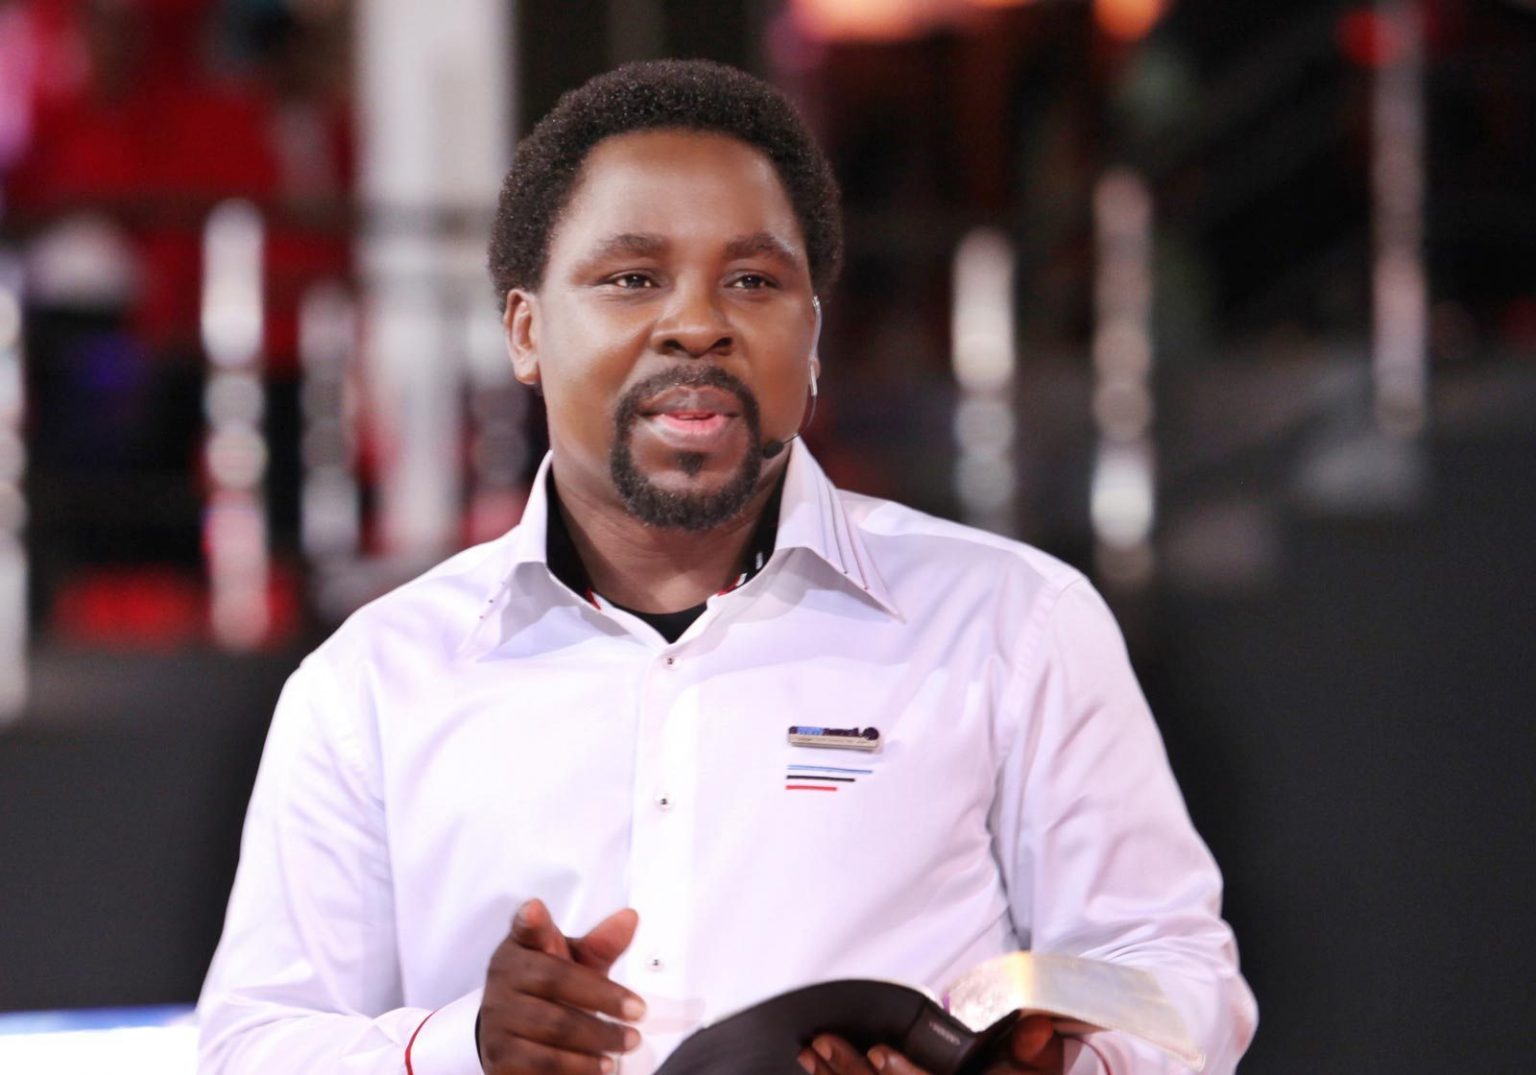 Bring COVID-19 Patients To My Church – T.B Joshua To World Leaders